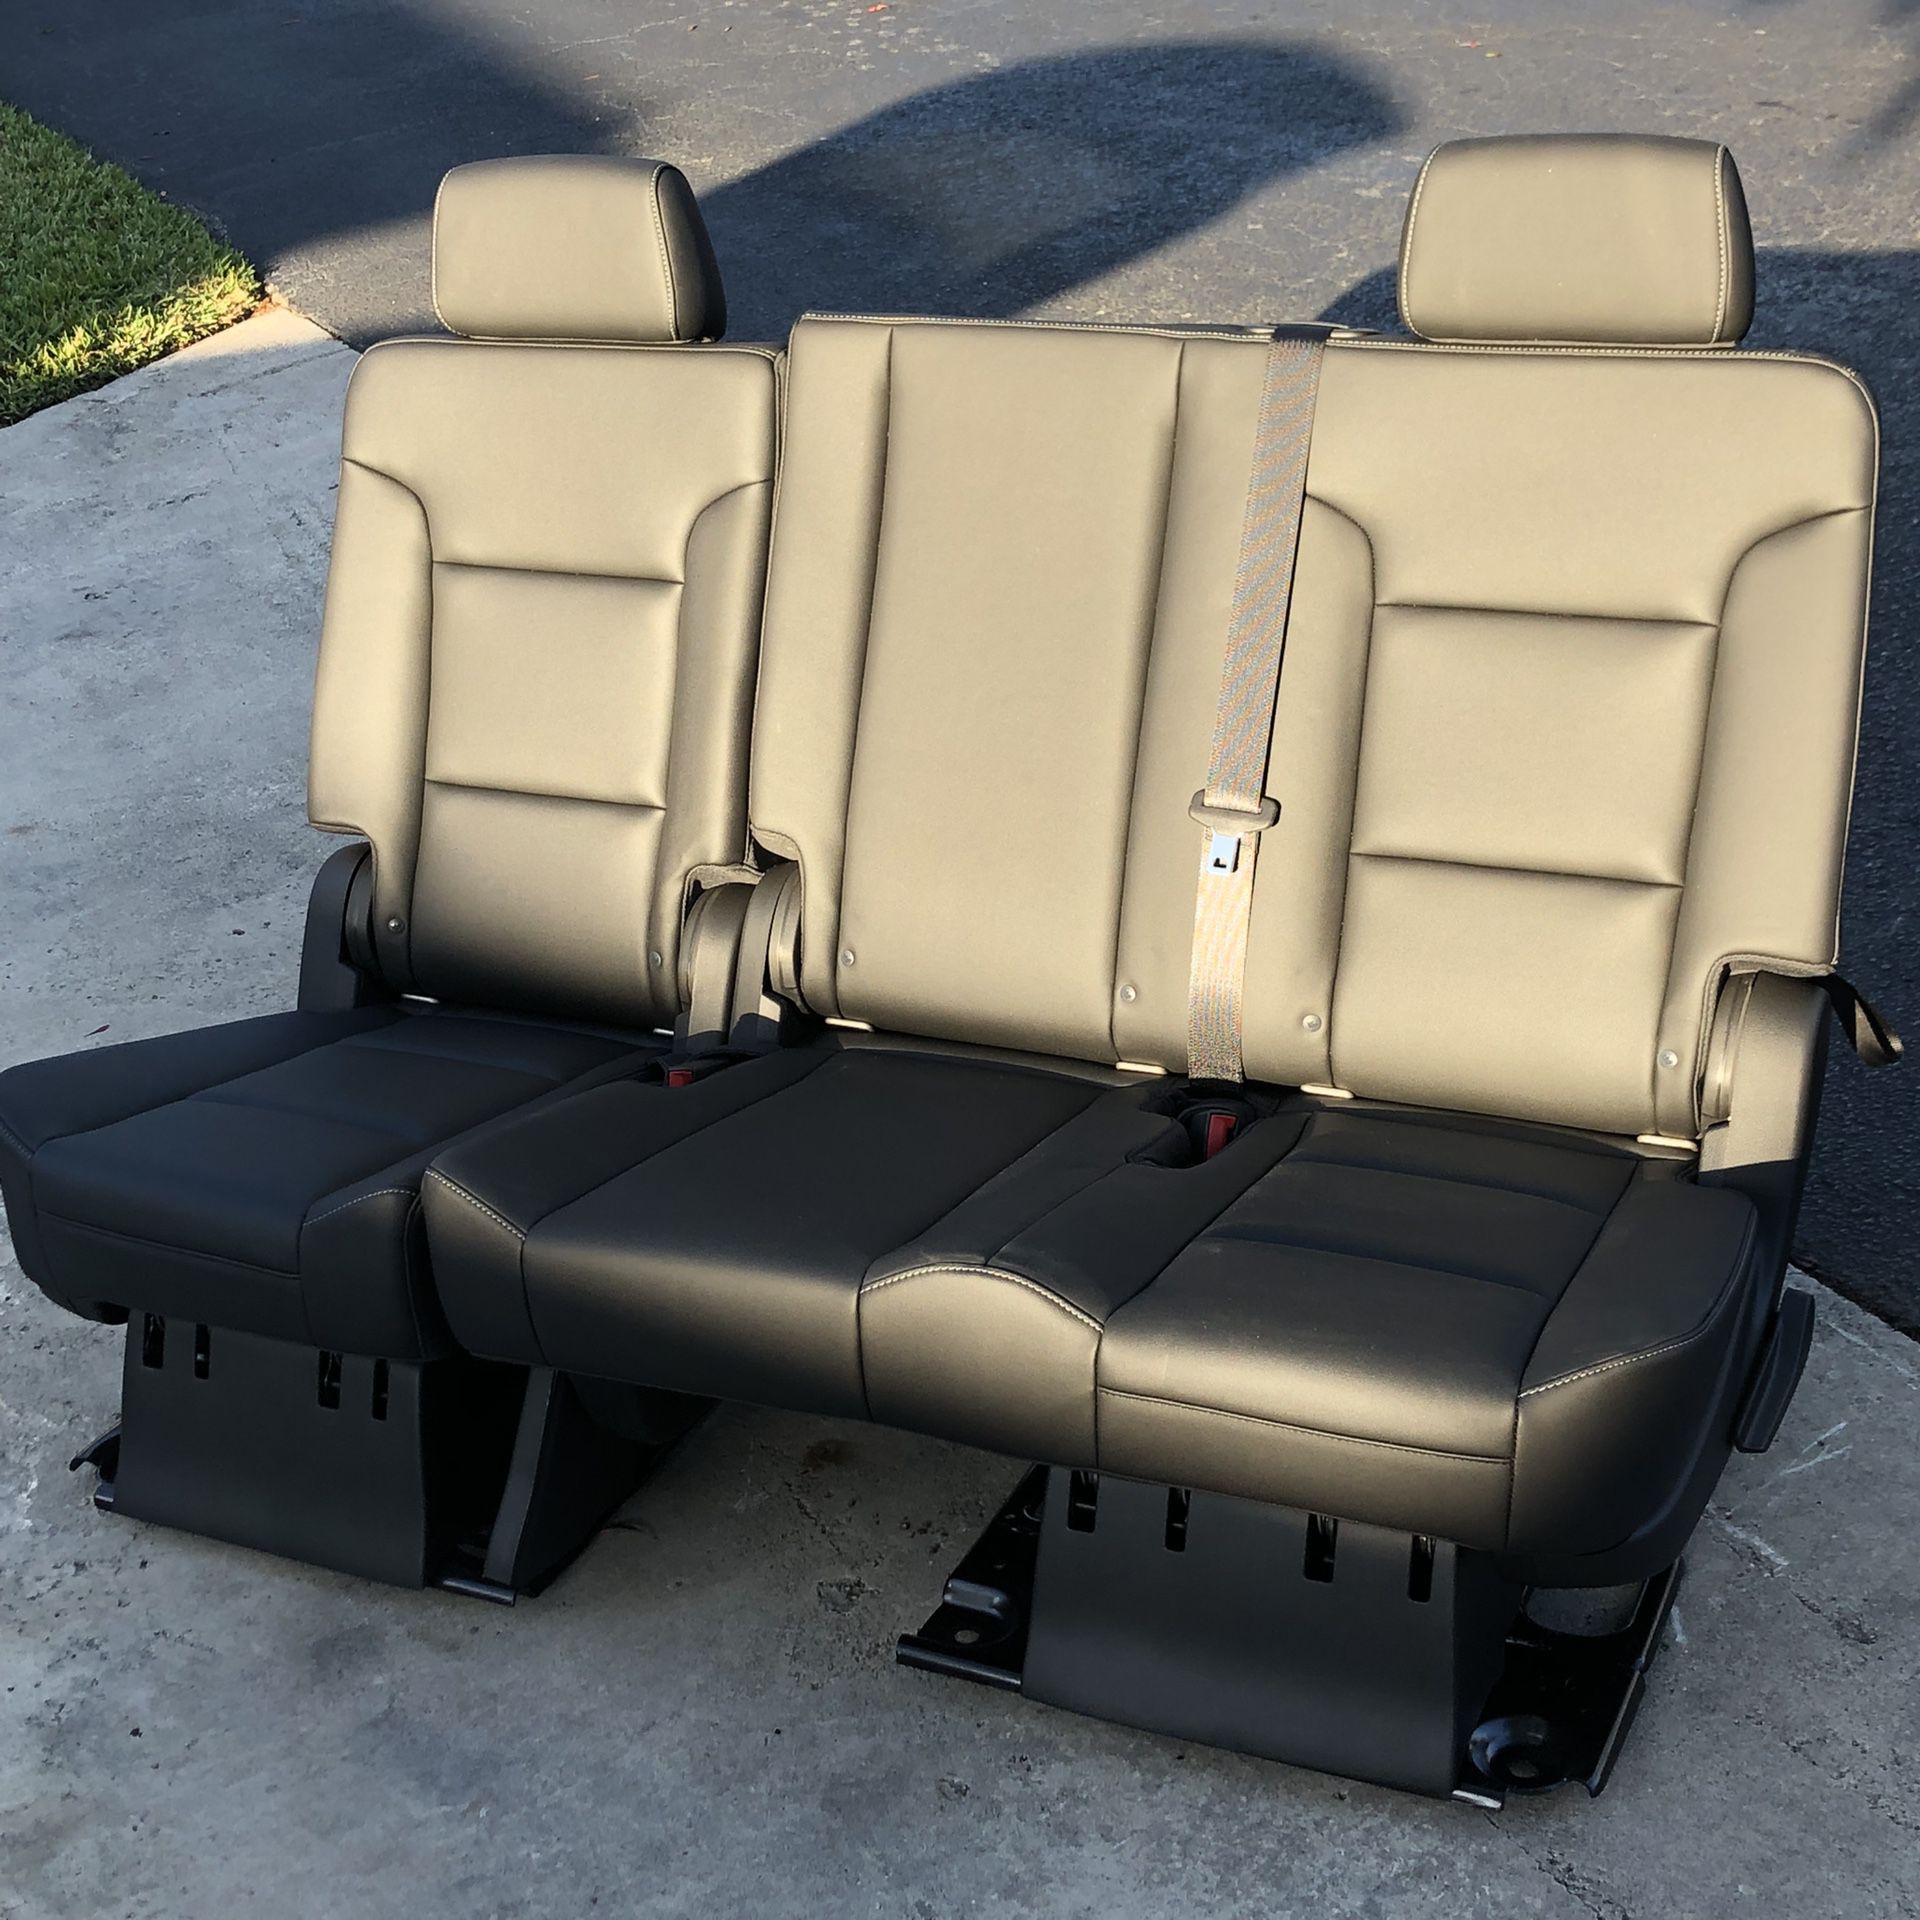 Tahoe Yukon Escalade -Jet Black second row bench seat. Fits 2007-2019 Tahoe Came out of 2018 model year